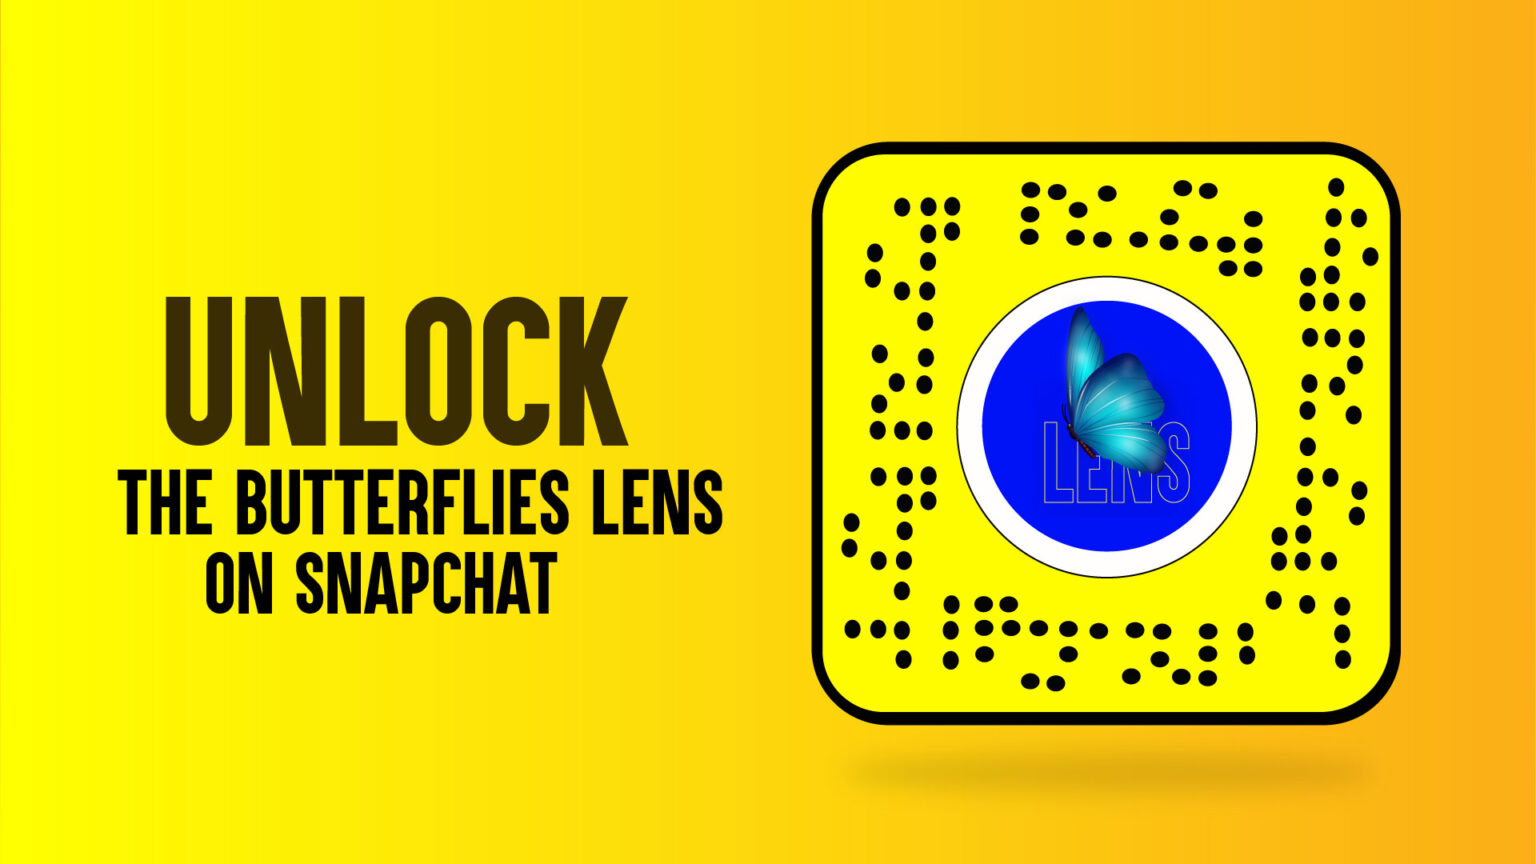 Best Way To Unlock the Butterflies Lens on Snapchat